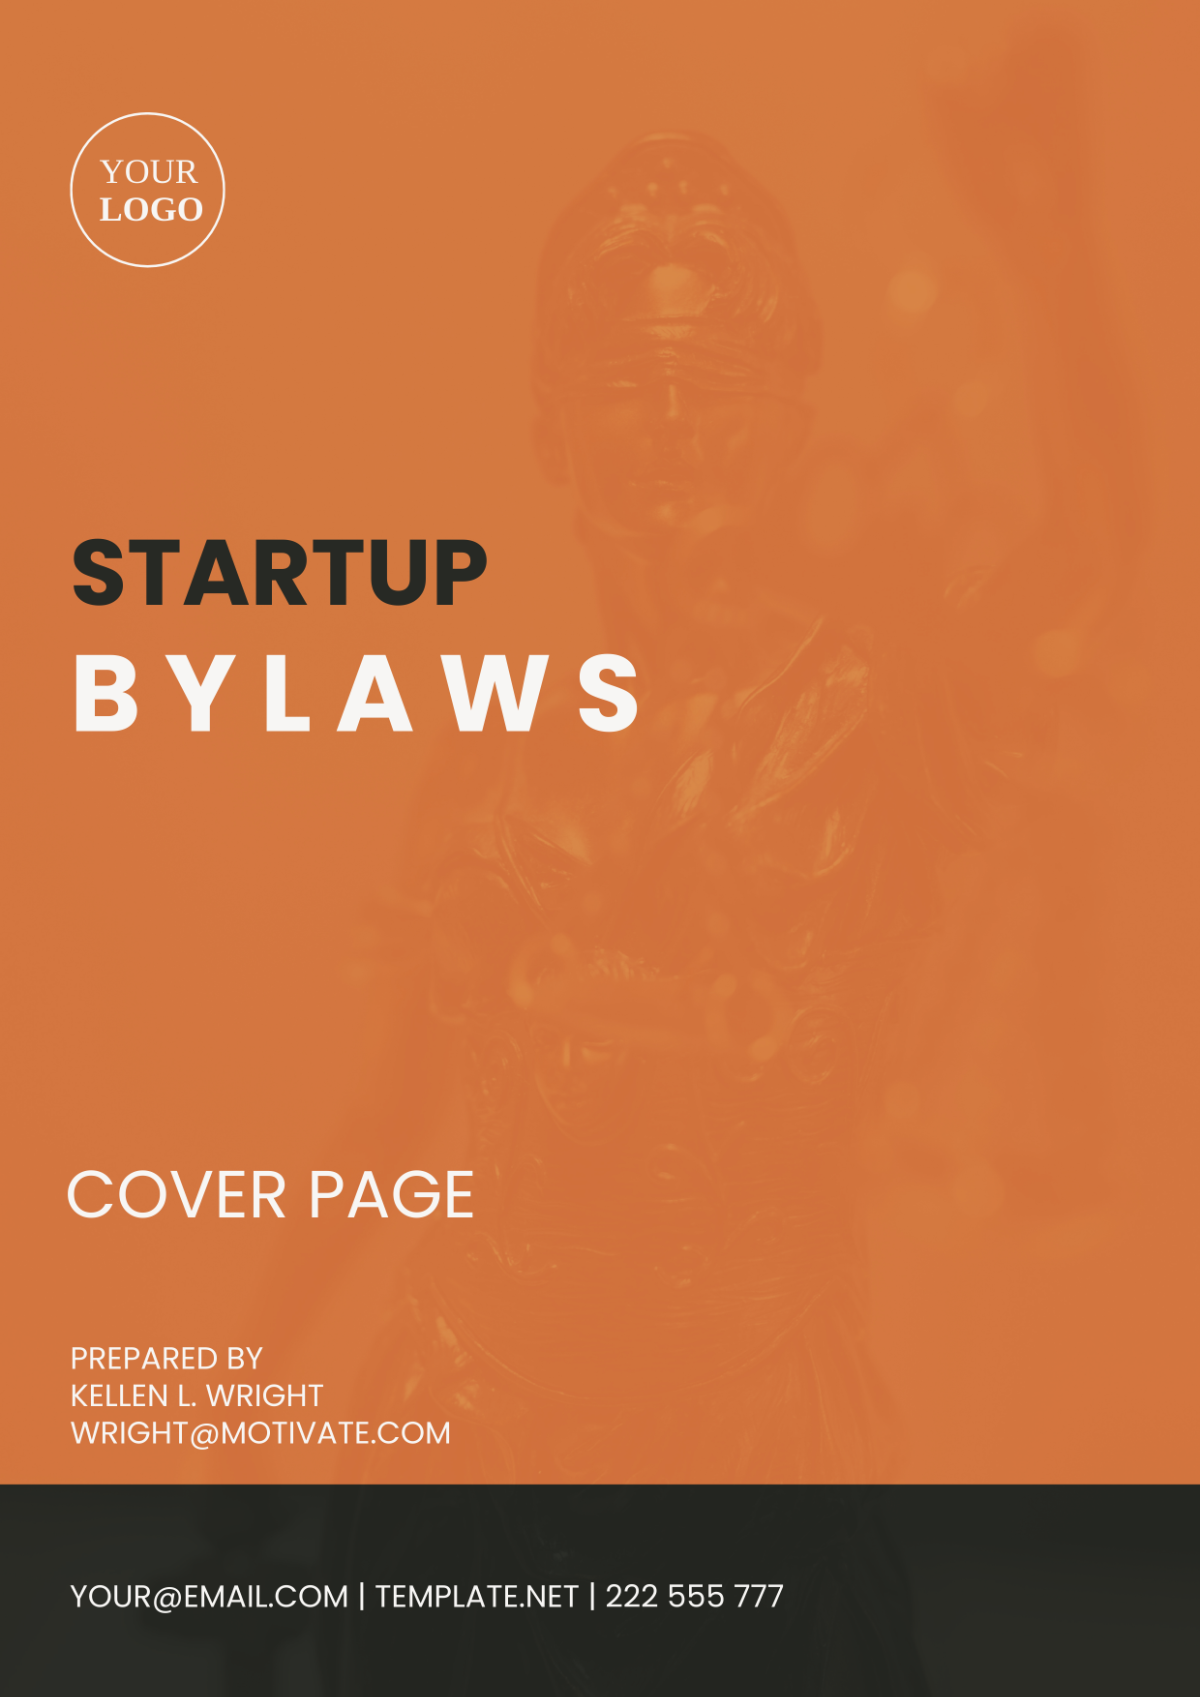 Startup Bylaws Cover Page Template